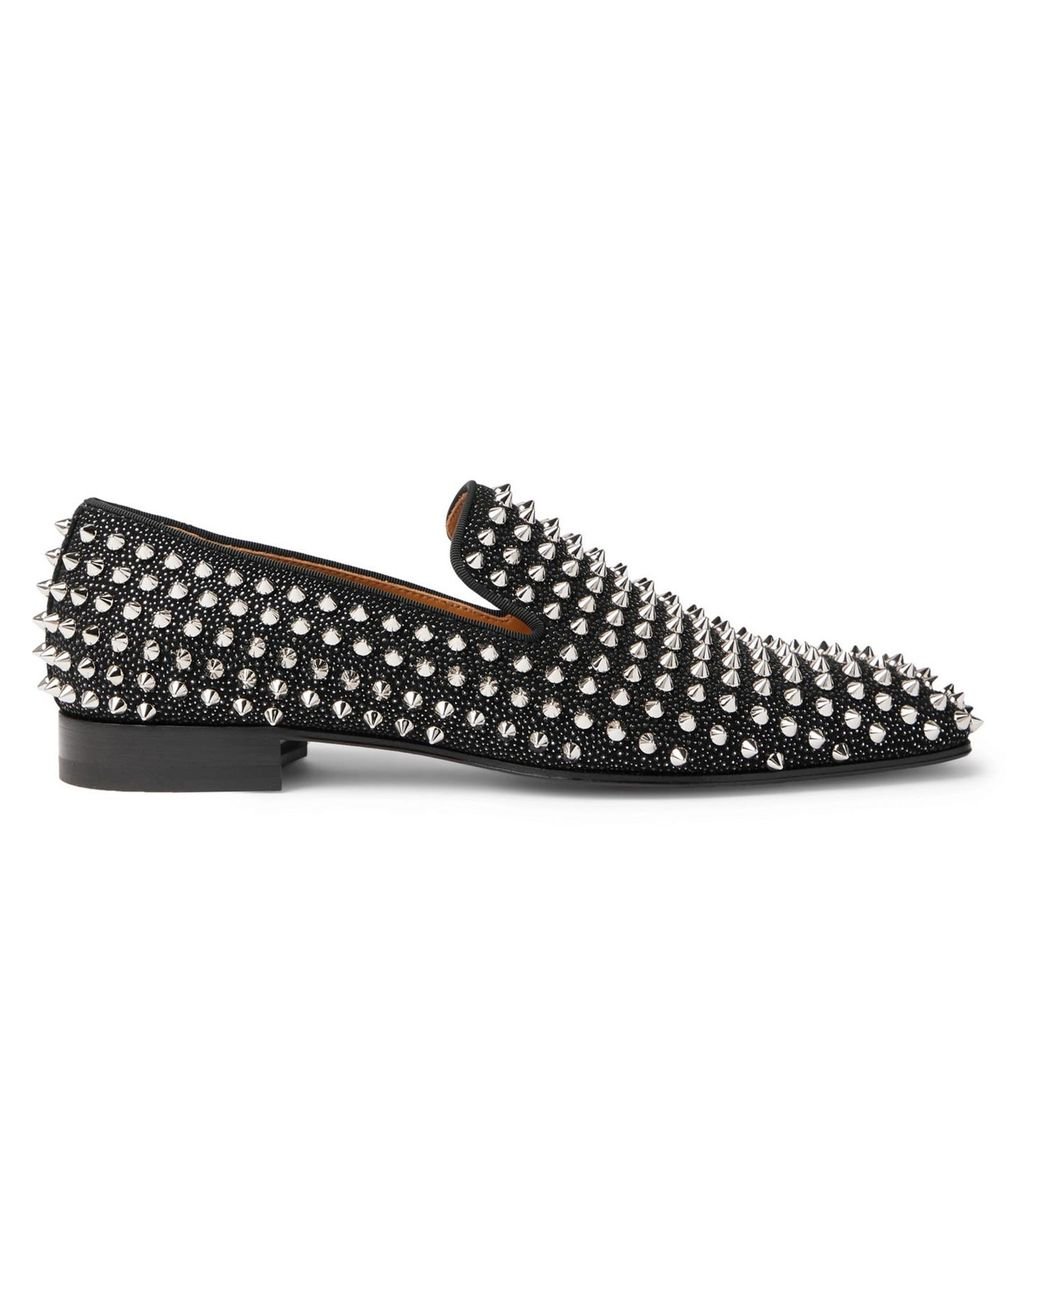 Christian Louboutin Dandelion Spiked Suede Loafers in Black for Men - Lyst